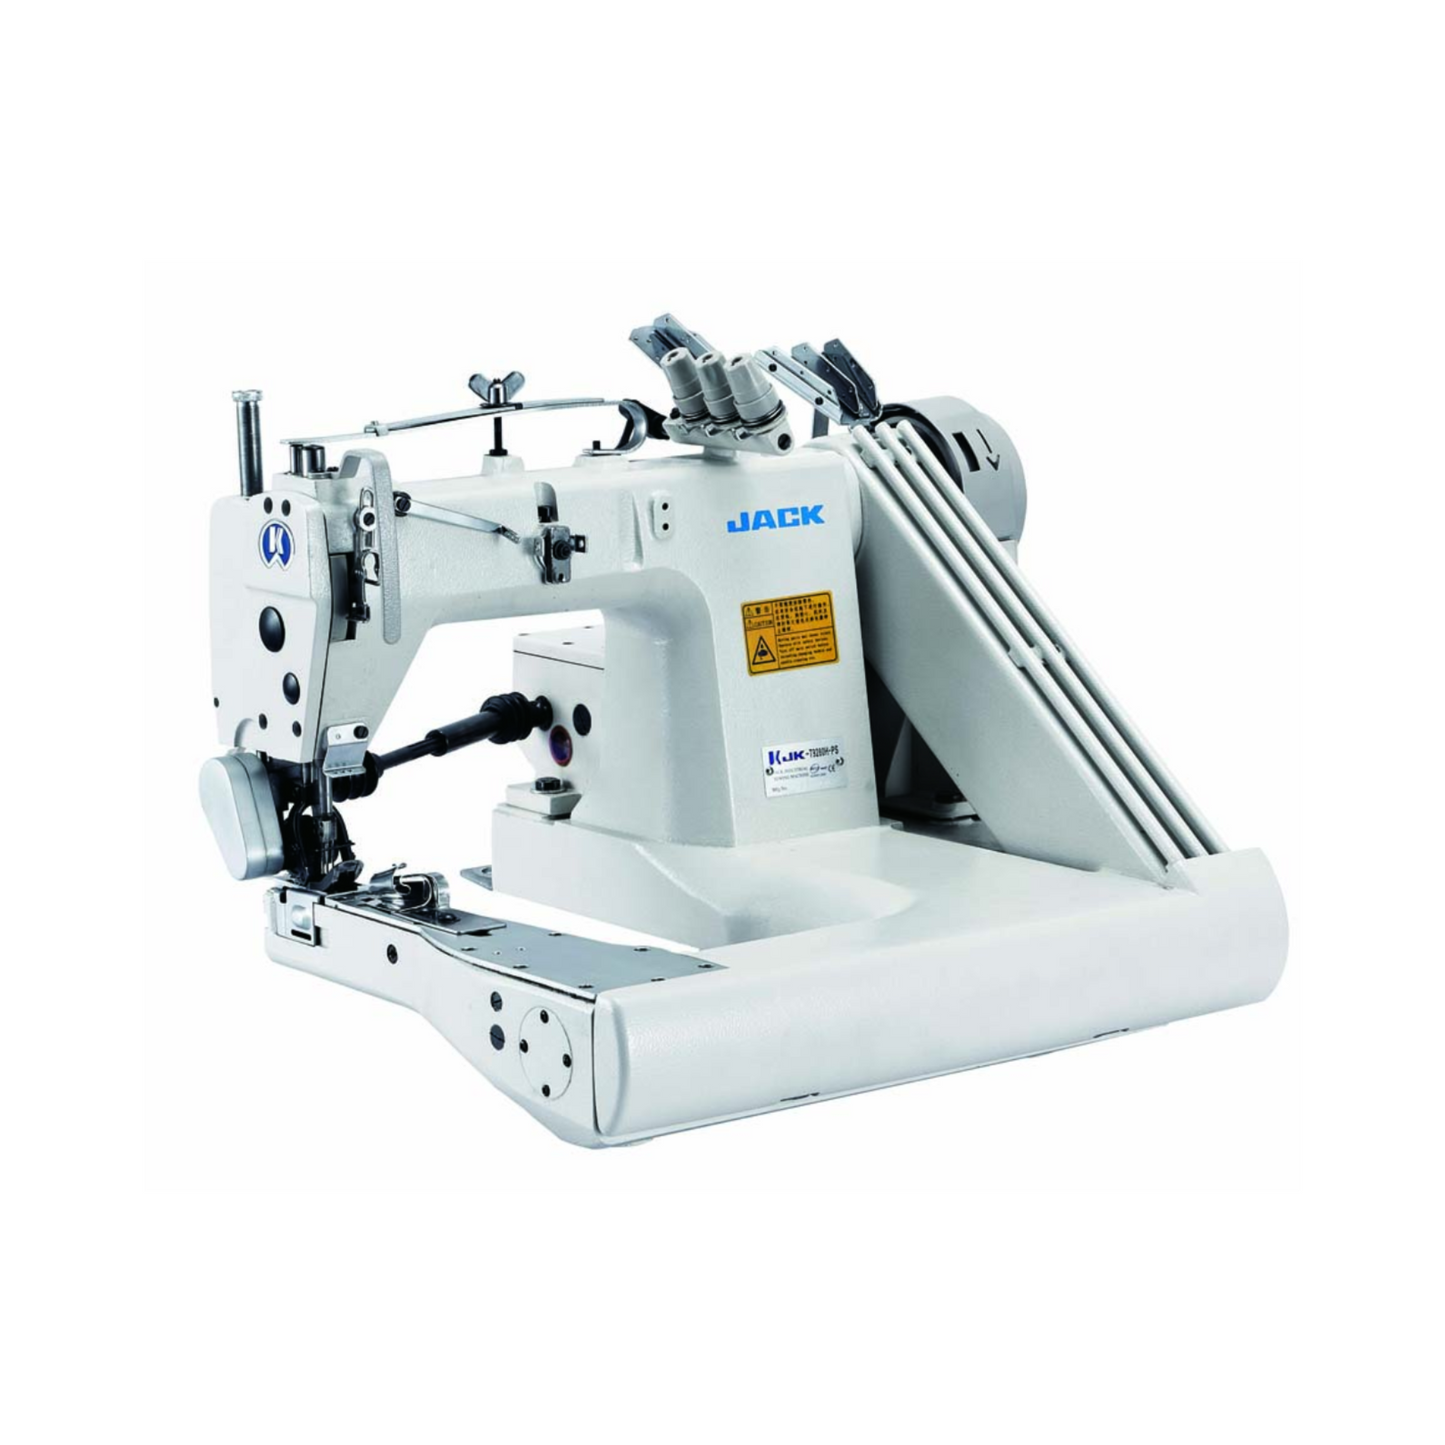 Jack K-T9280-73-PS / JK-T9270-PL feed of the arm - Sewing machine - White - Front view